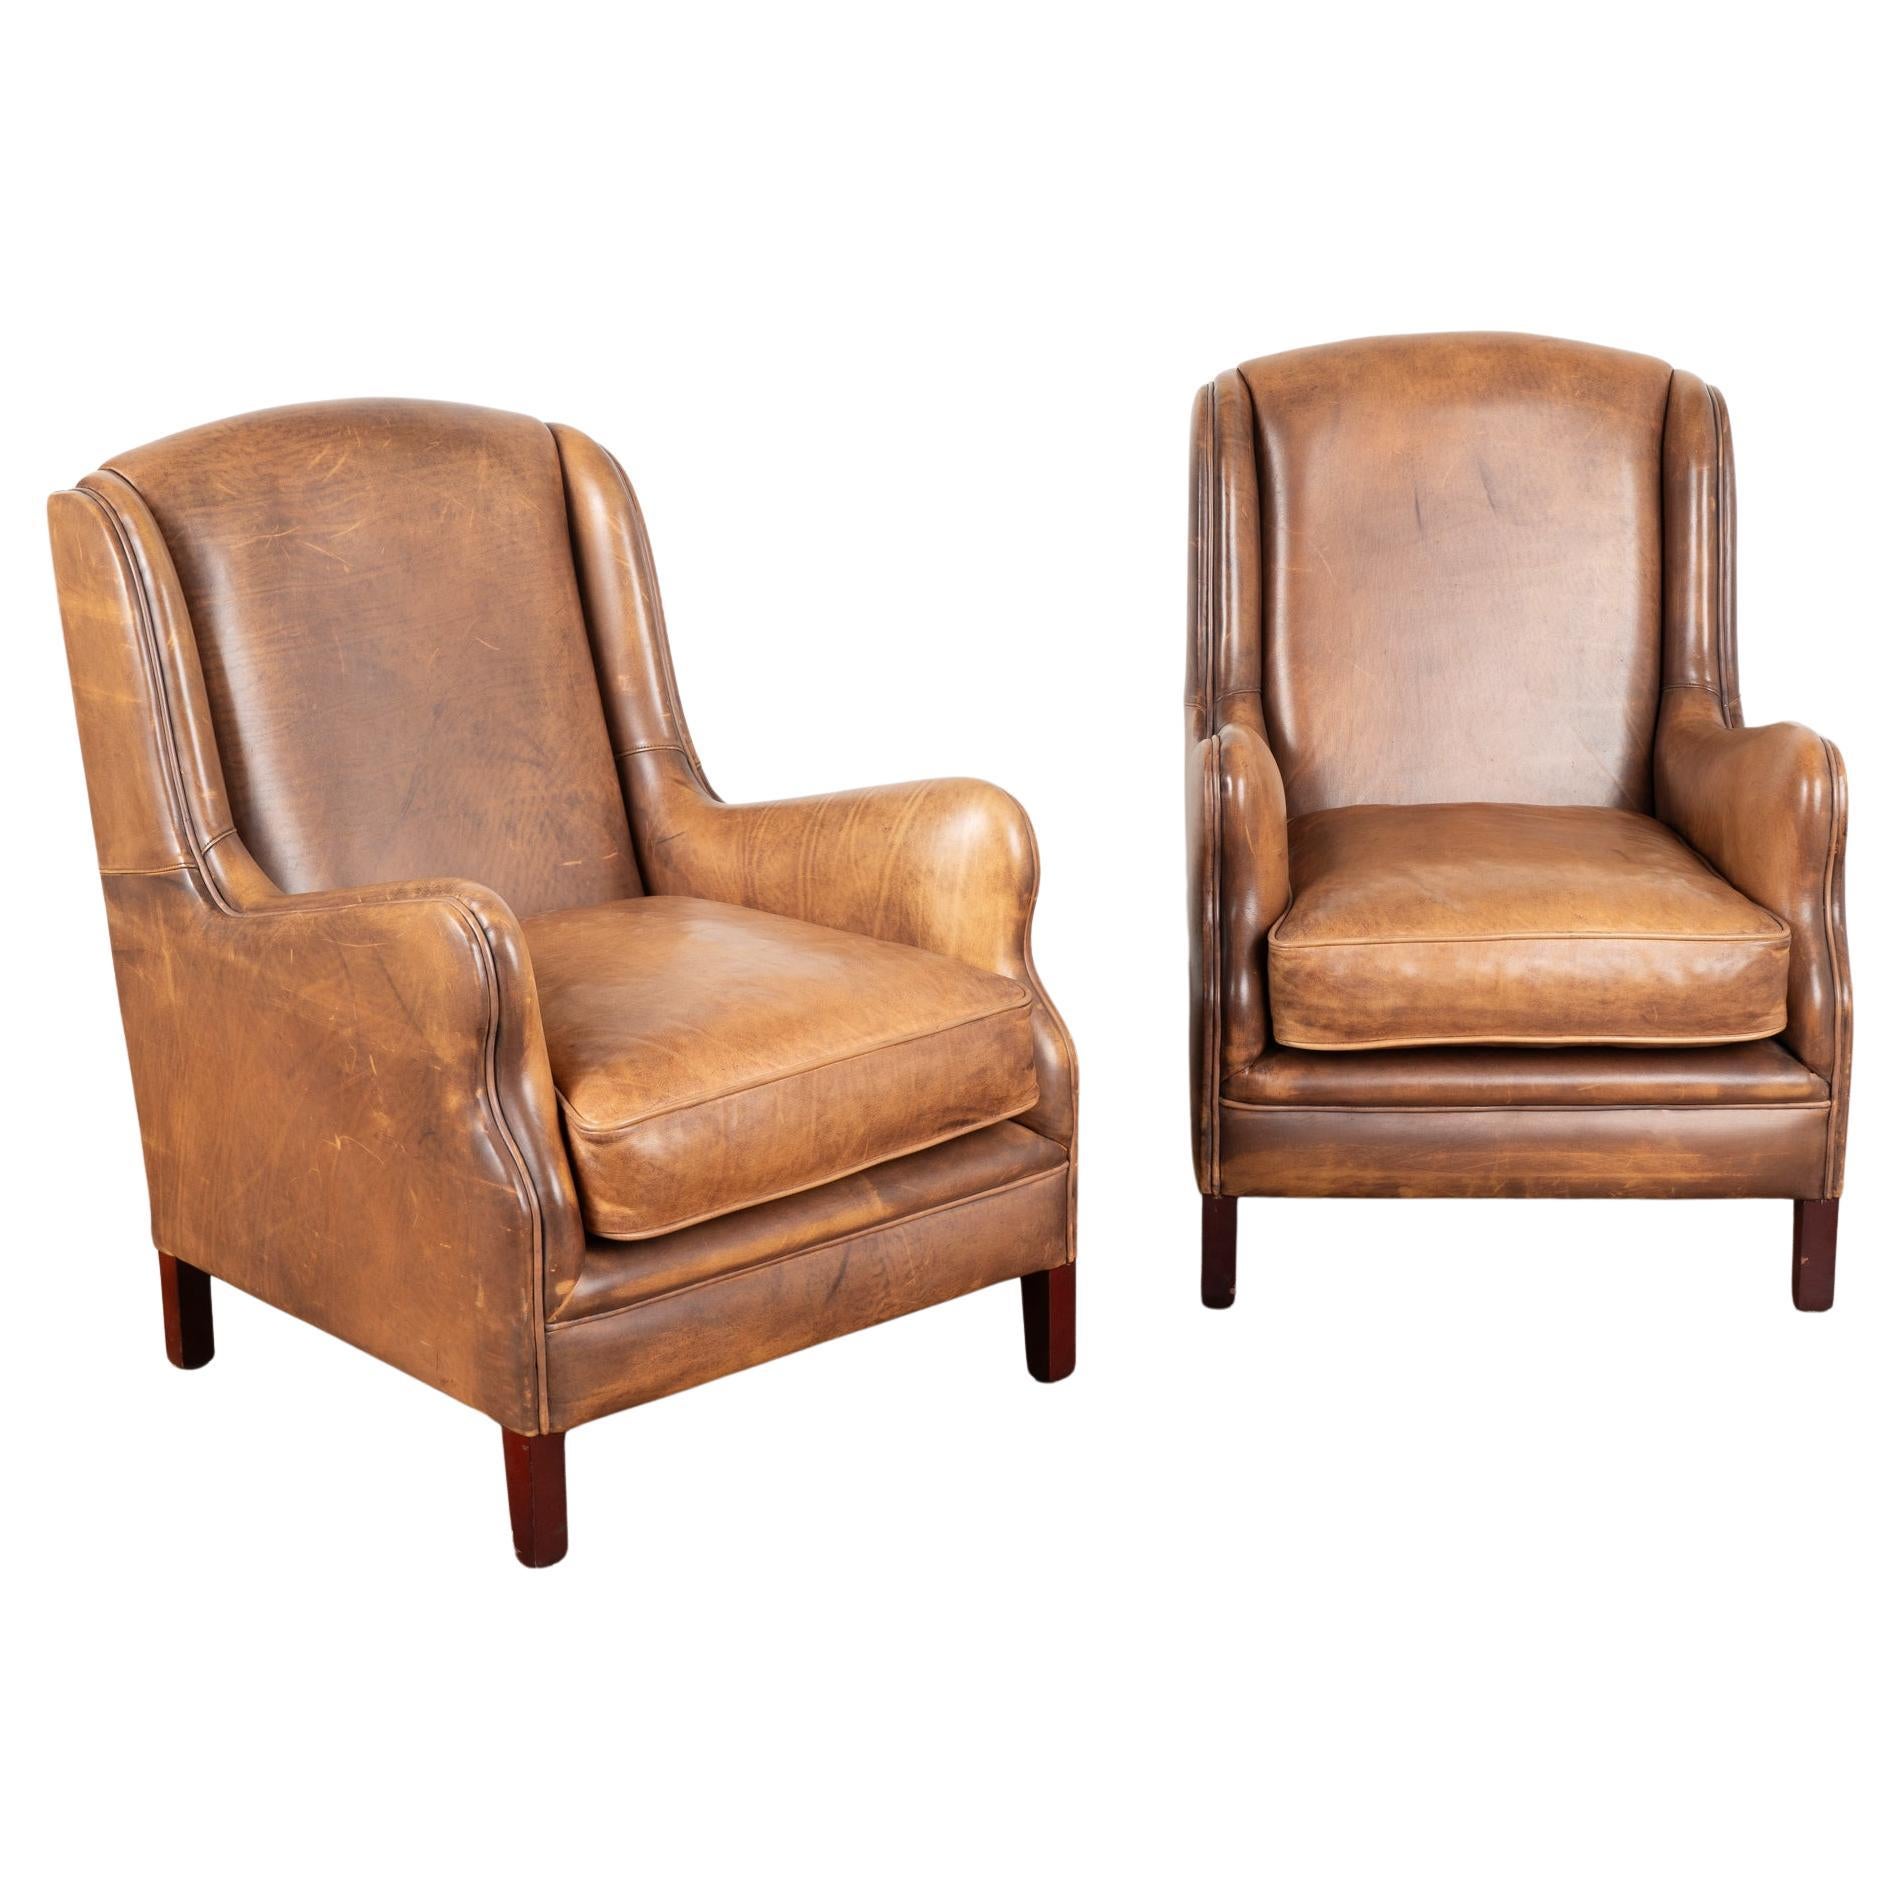 Pair, Vintage Brown Leather Wingback Arm Chairs From France, circa 1920-40